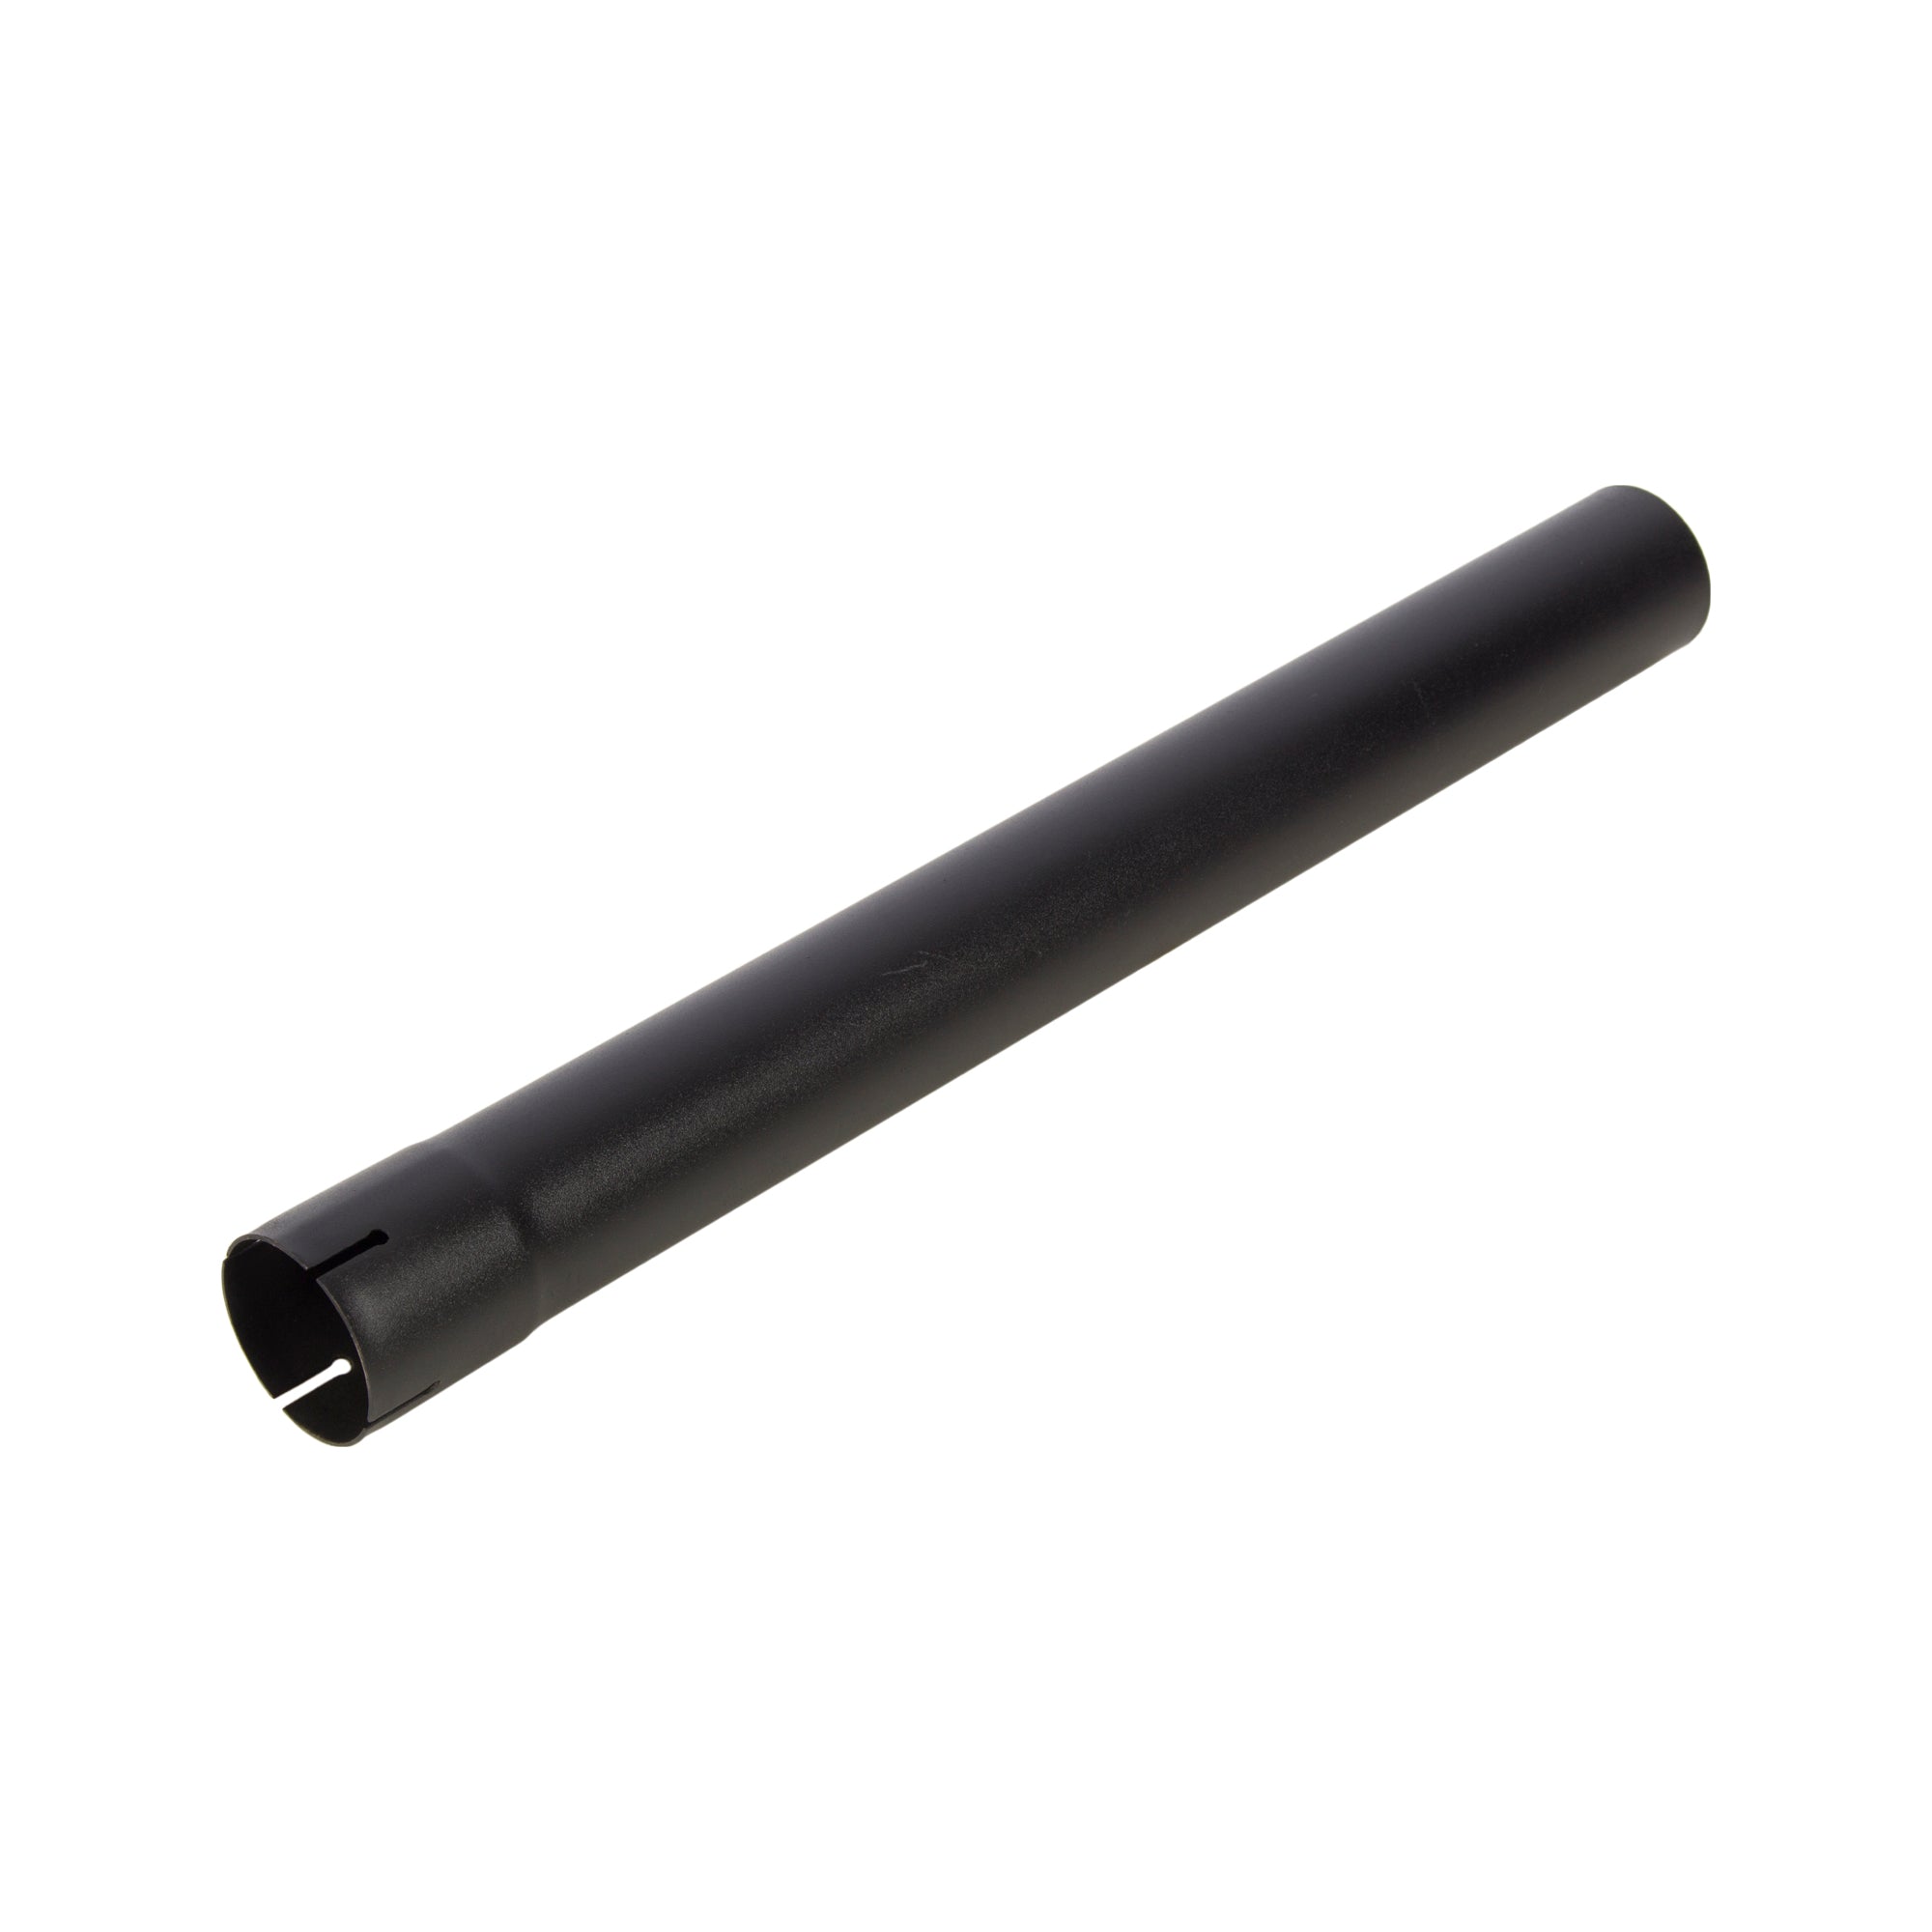 Exhaust Stack Pipe   2-1/2" x 24" Straight Black